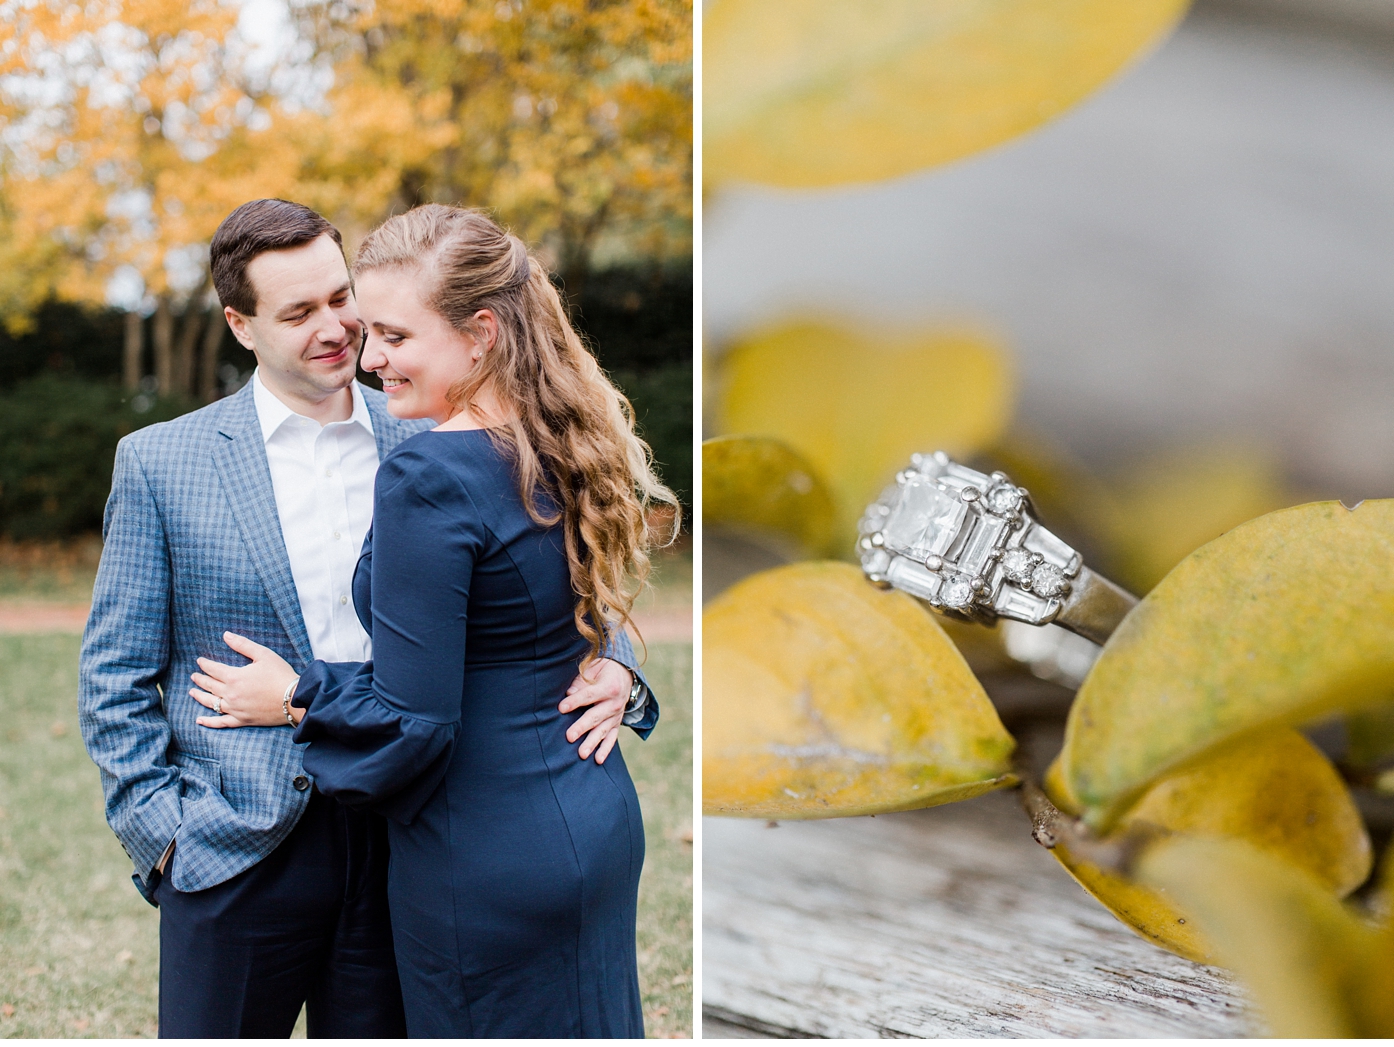 Reveille Engagement Session in Richmond VA by Alisandra Photography